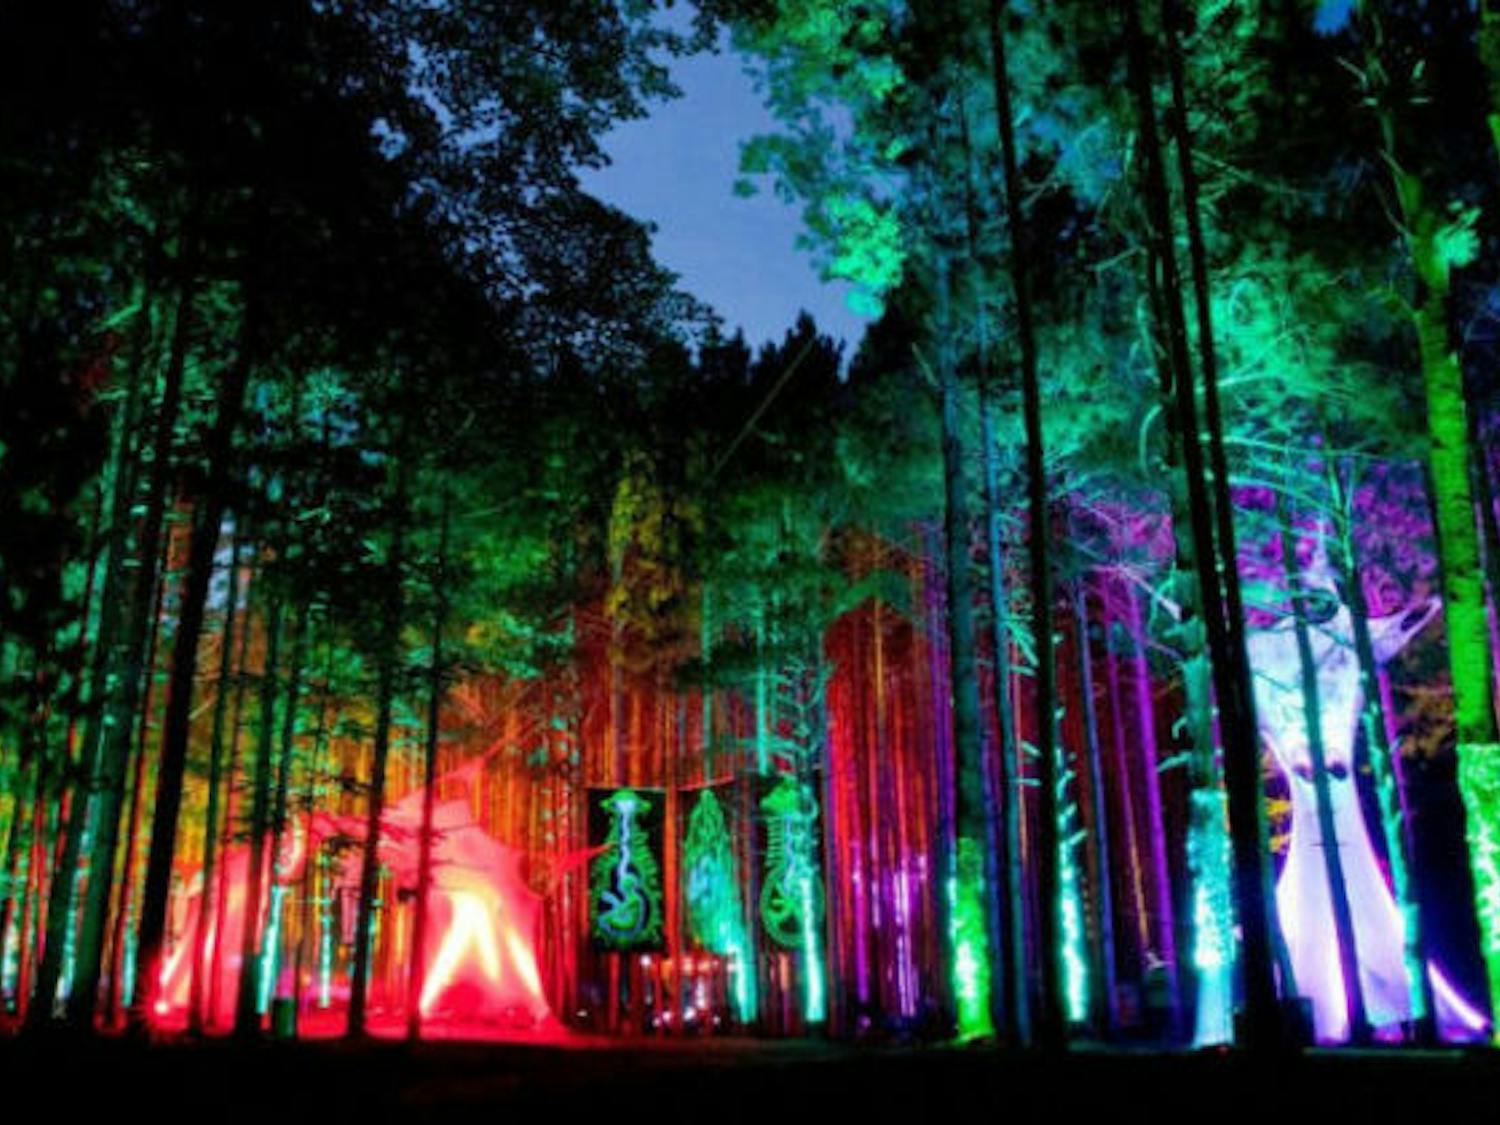 "Electric Forest Music Festival, Rothbury, Michigan" by Adam Rifkin, used under CC BY 2.0